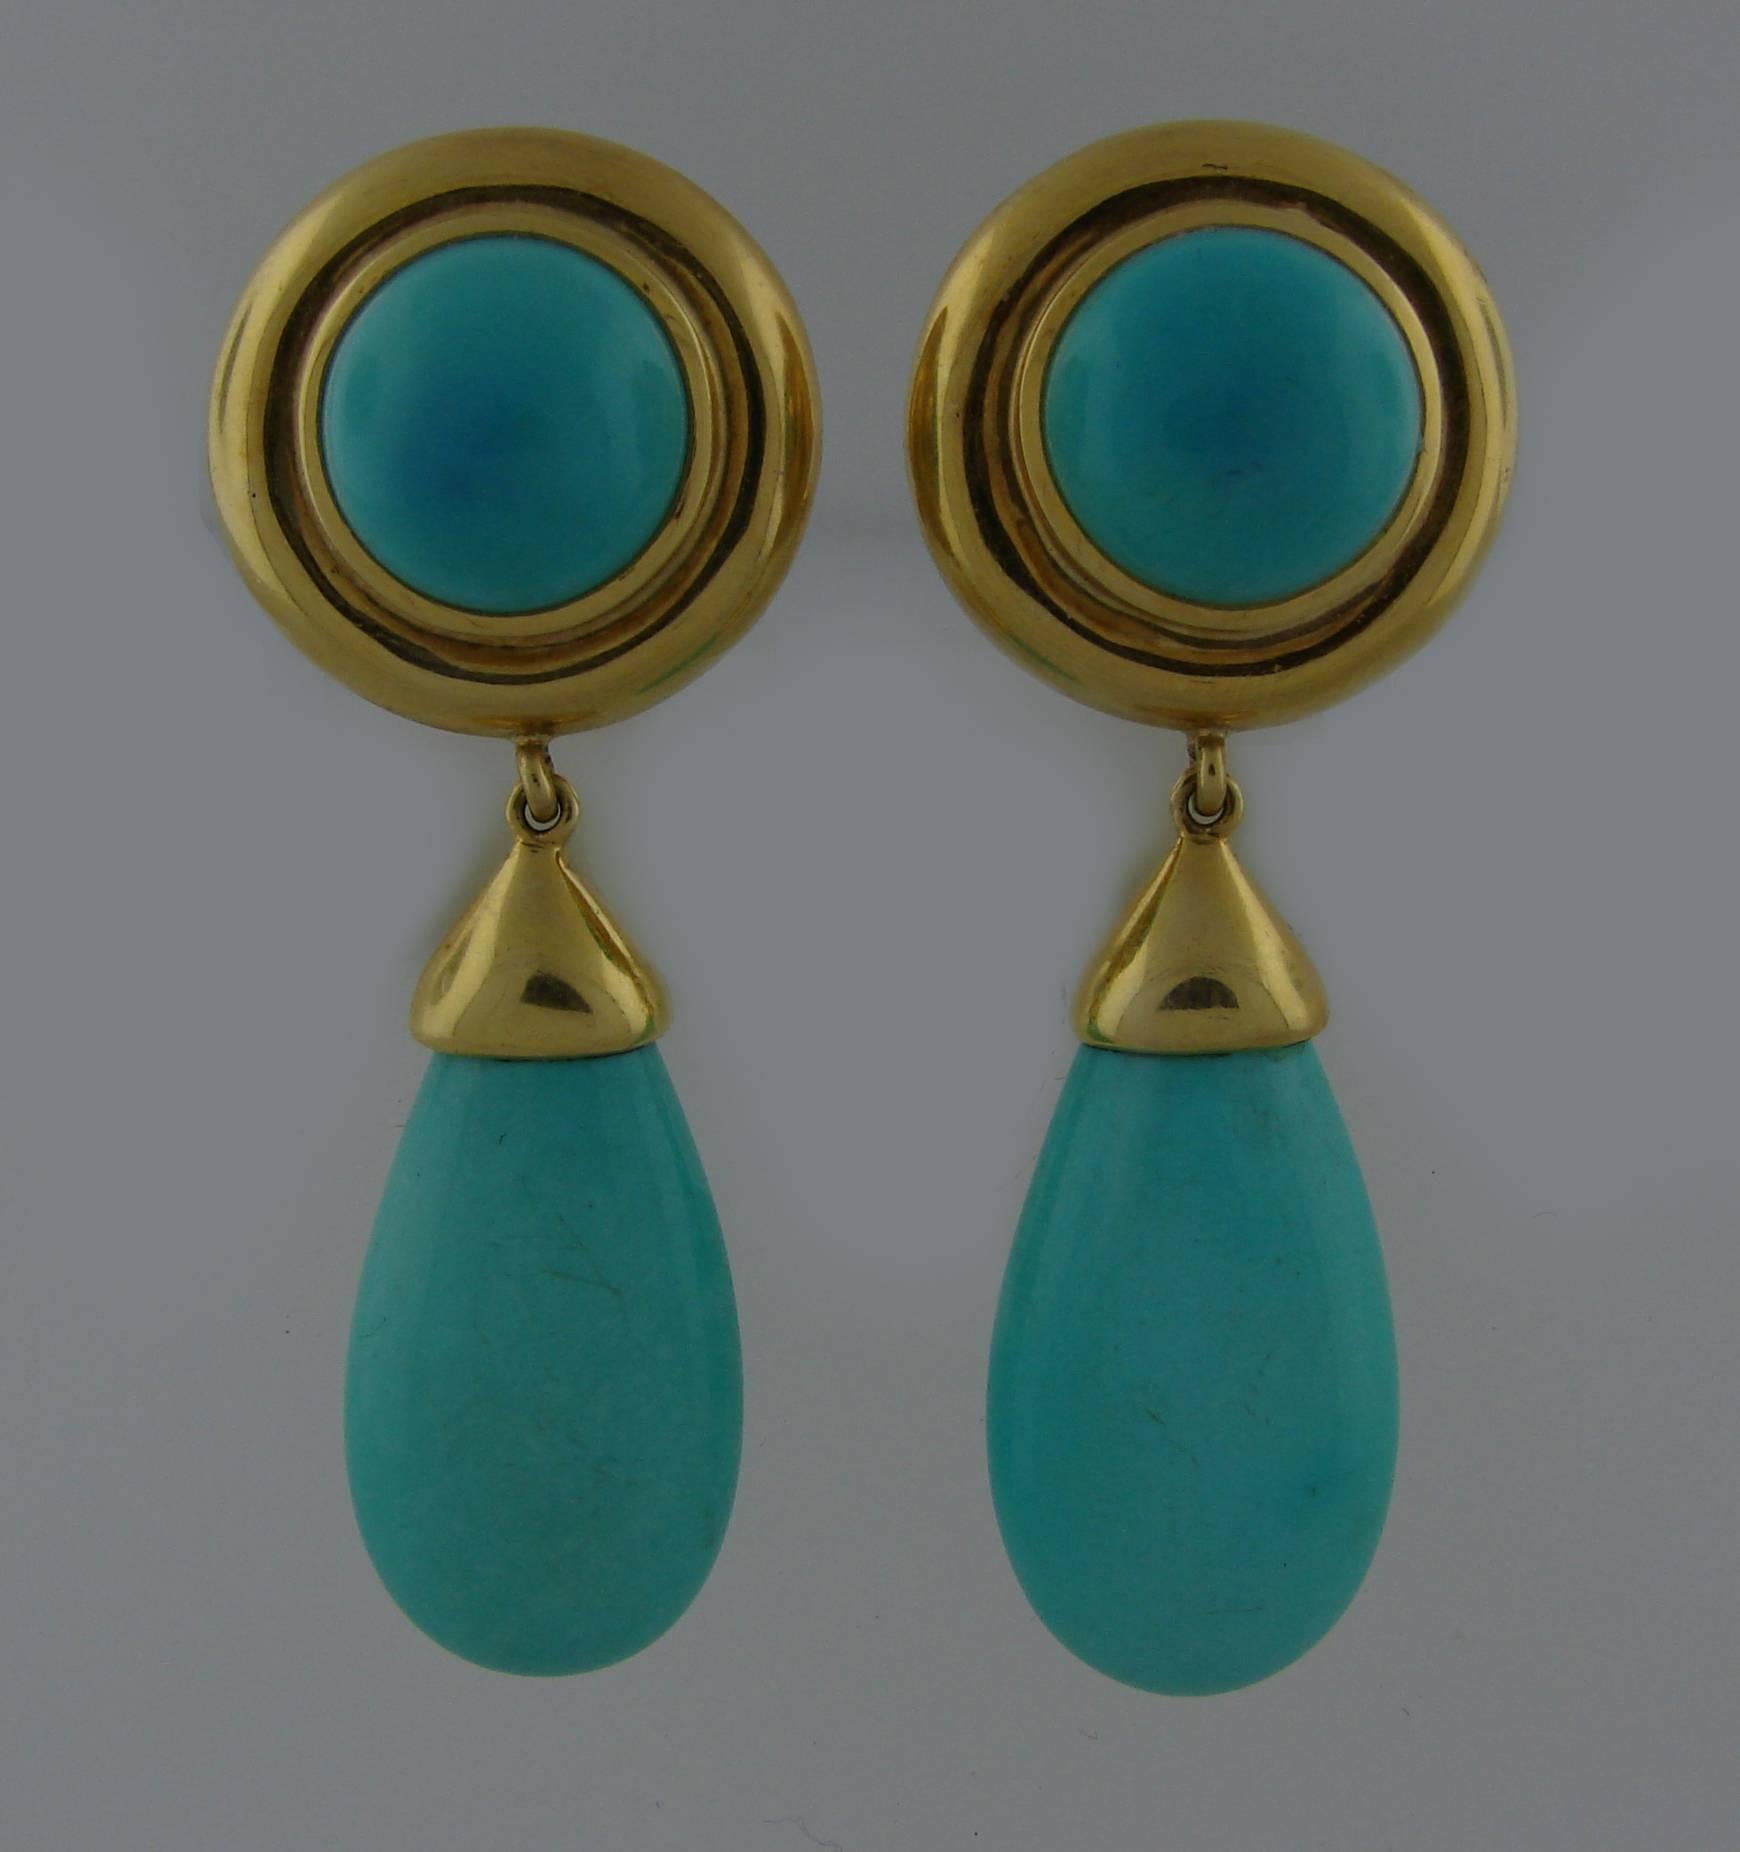 Gorgeous elegant colorful earrings created by Paloma Picasso for Tiffany & Co. in the 1980's. Feature beautiful turquoise set in 18k yellow gold.
The earrings are 2